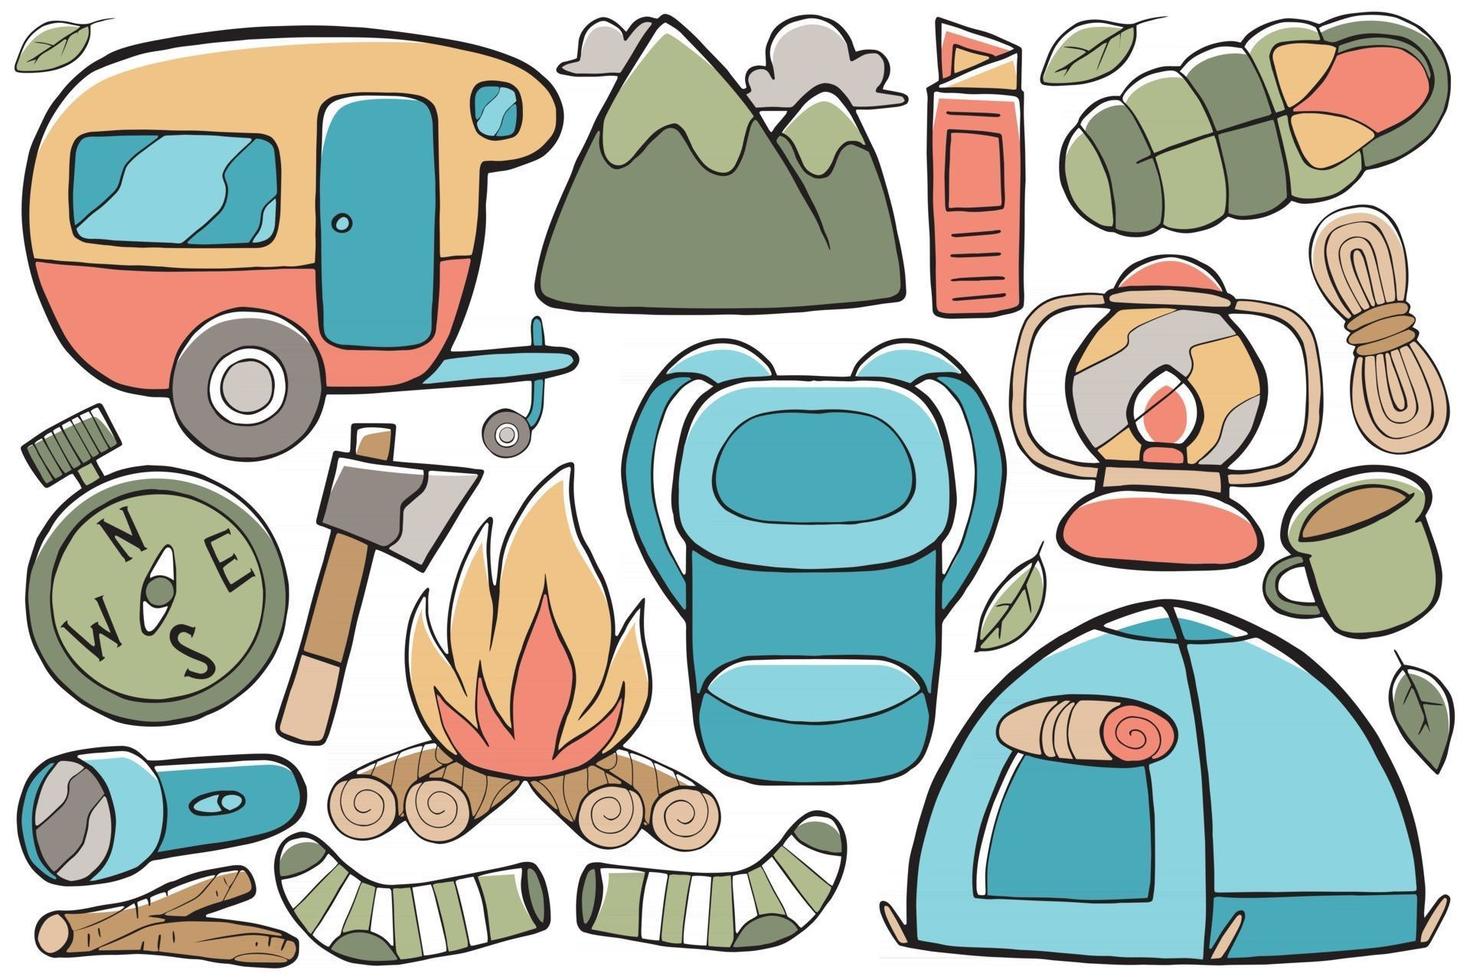 Camping Doodle Vector in Flat Design Style